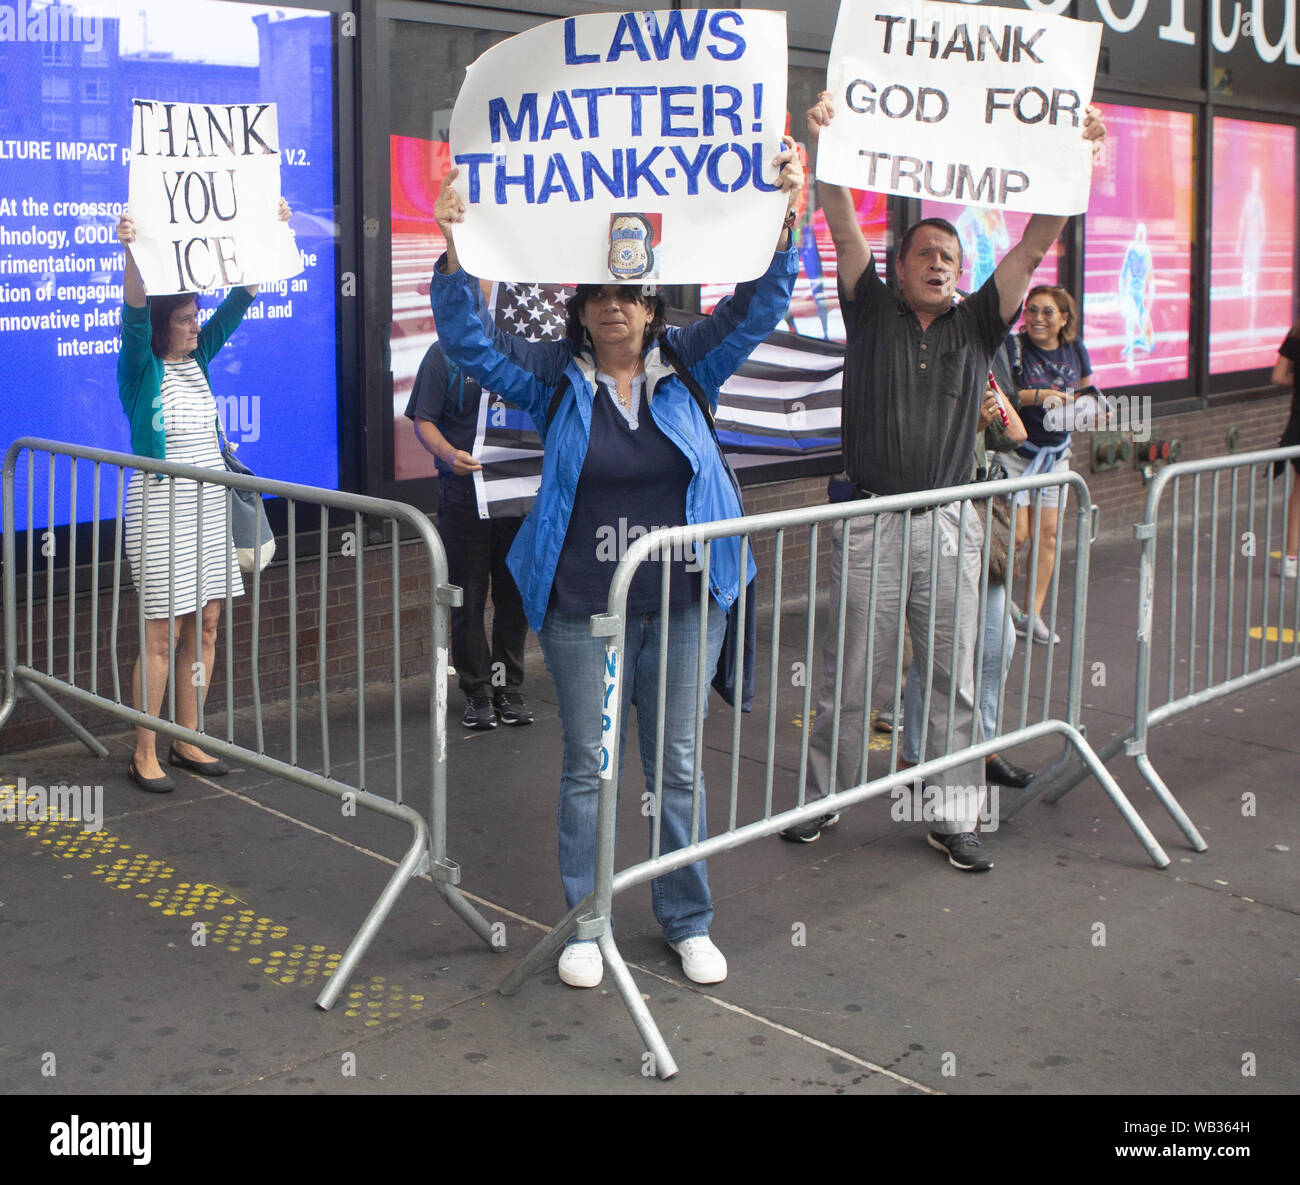 August 23, 2019: Trump Supporters and anti-protestors appear during a protest against Greyhound Corporation and ICE (Immigration Customs and Enforcement) at the Port Authority Bus Terminal on 42nd and 8th Avenue in New York, New York. About 100 activists from a coalition of groups including FIRE (Fight For Immigrant Refugees Everywhere) protested Greyhound allowing ICE agents to board their busses 'searching for migrants,'' officials said. Credit: Brian Branch Price/ZUMA Wire/Alamy Live News Stock Photo